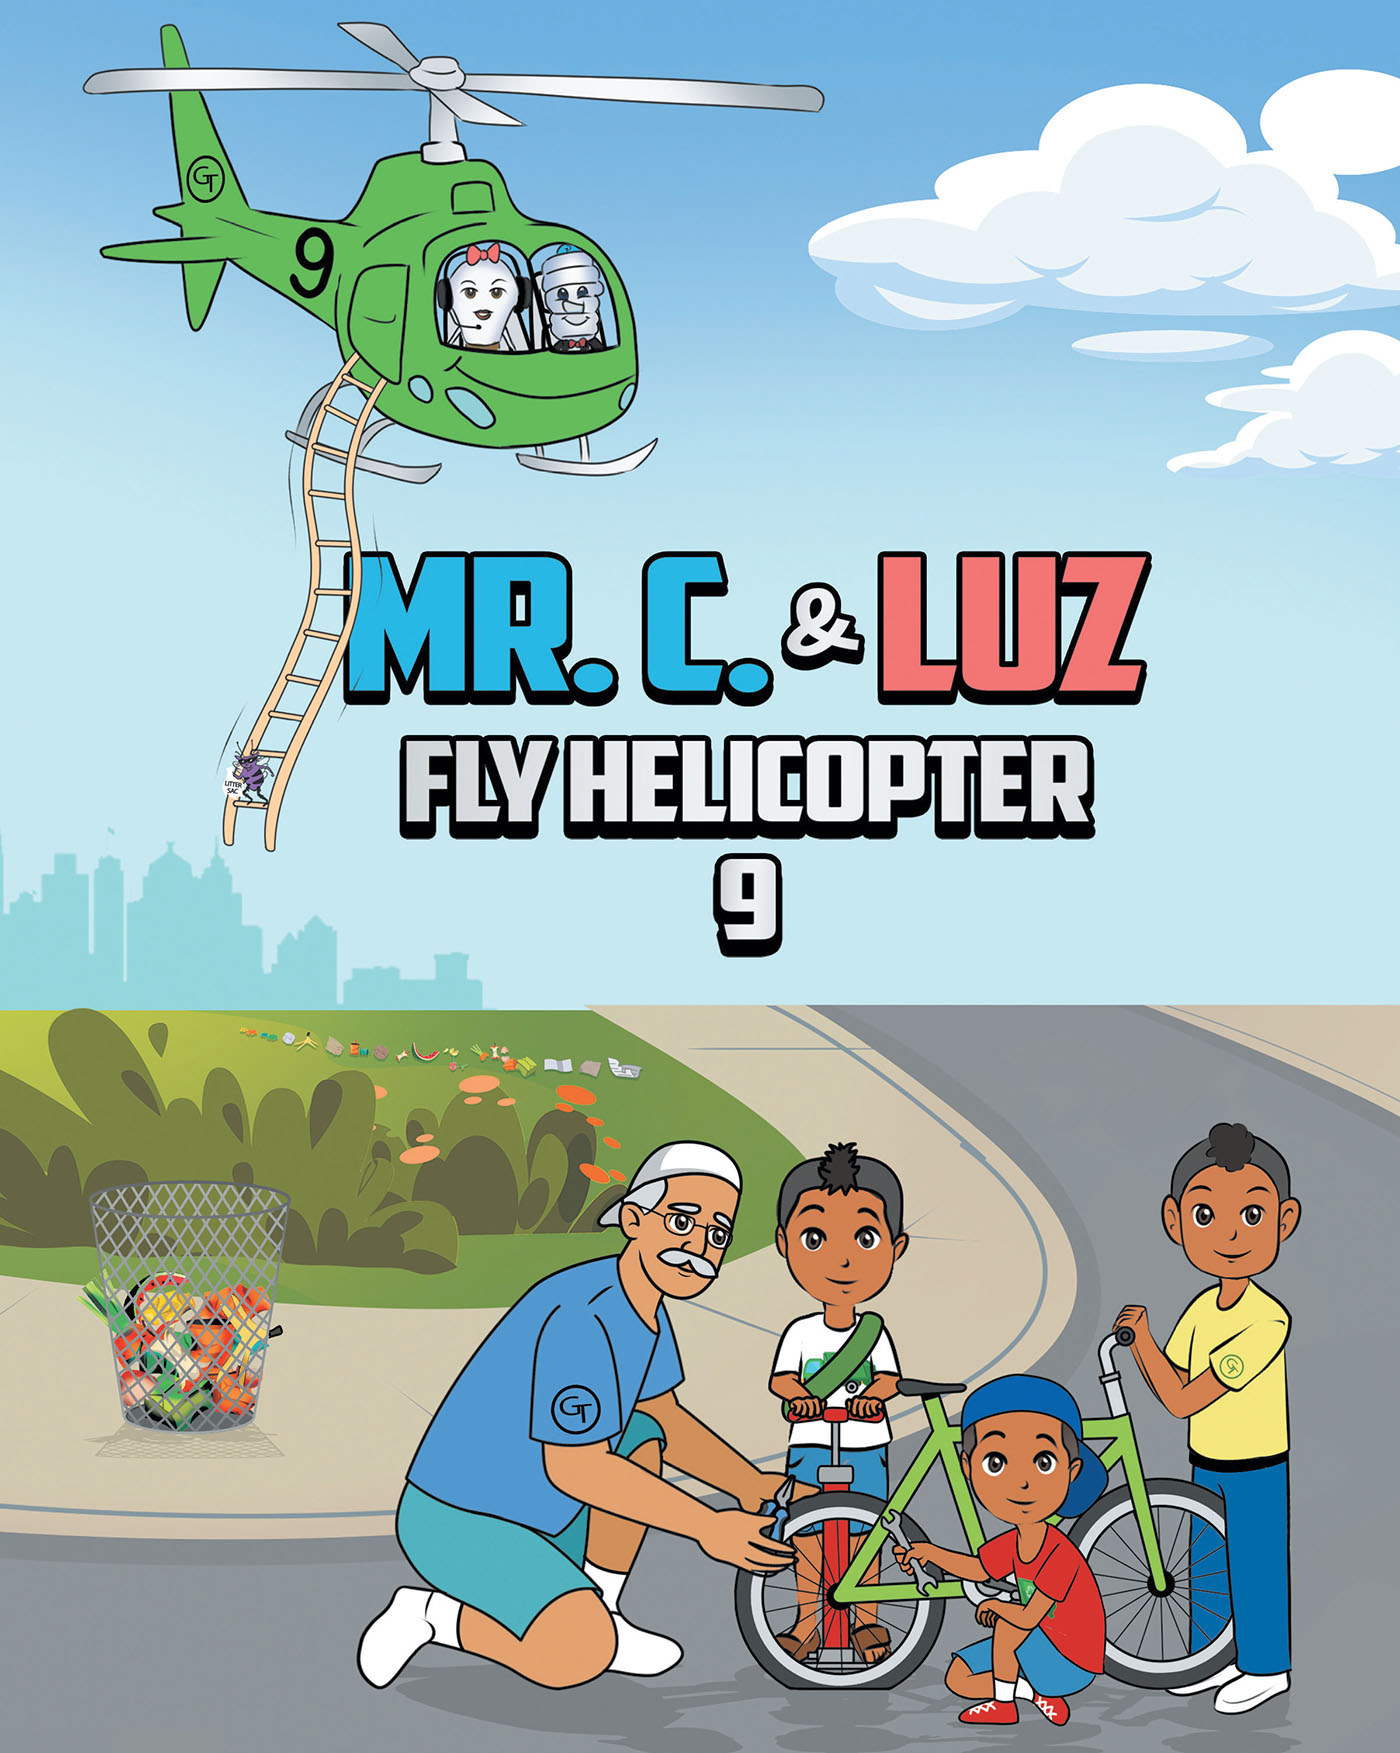 Katie’s New Book, "Mr. C. and Luz Fly Helicopter 9," Follows Three Boys and Their Grandfather as They Encounter the Litterbug's Return and Seek Help from Special Friends